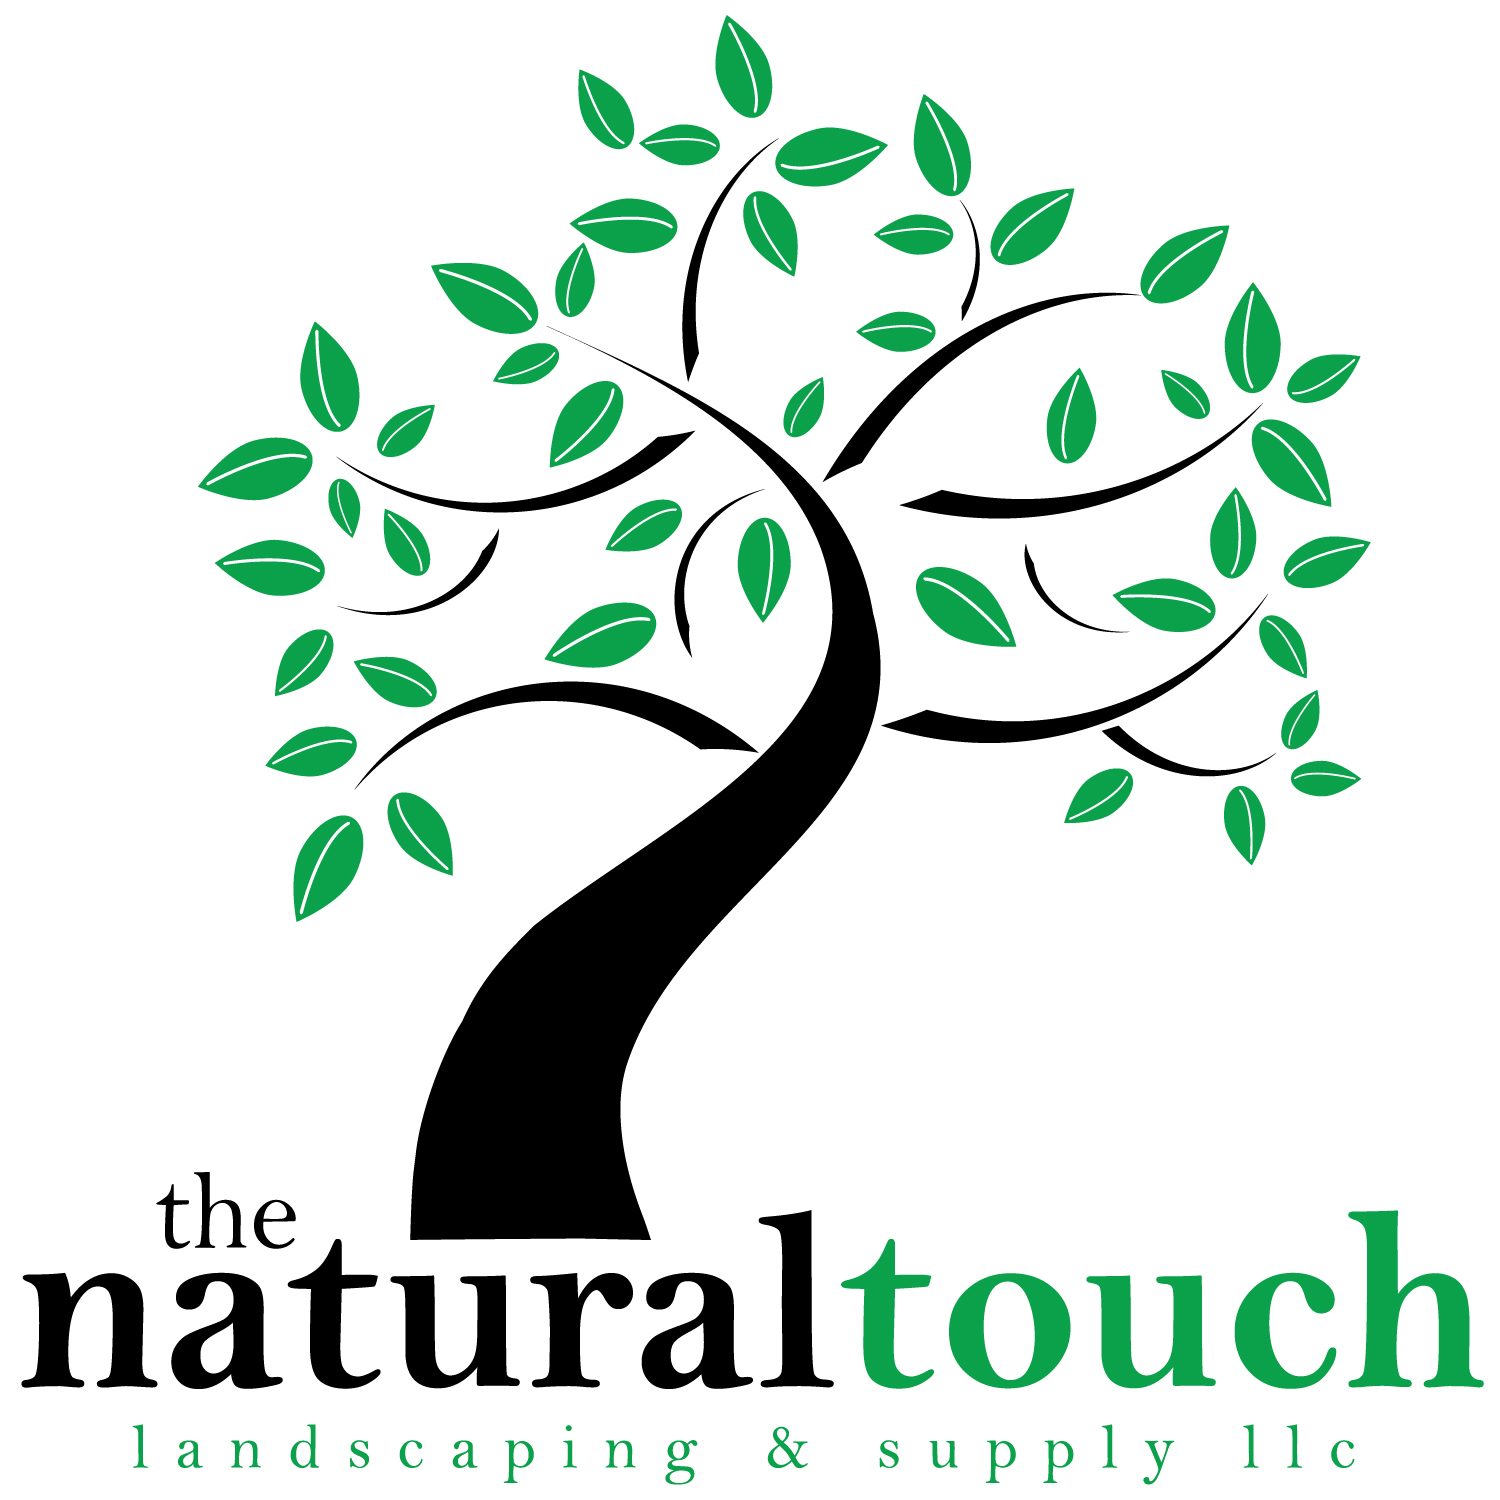 The Natural Touch Landscaping and Supply LLC